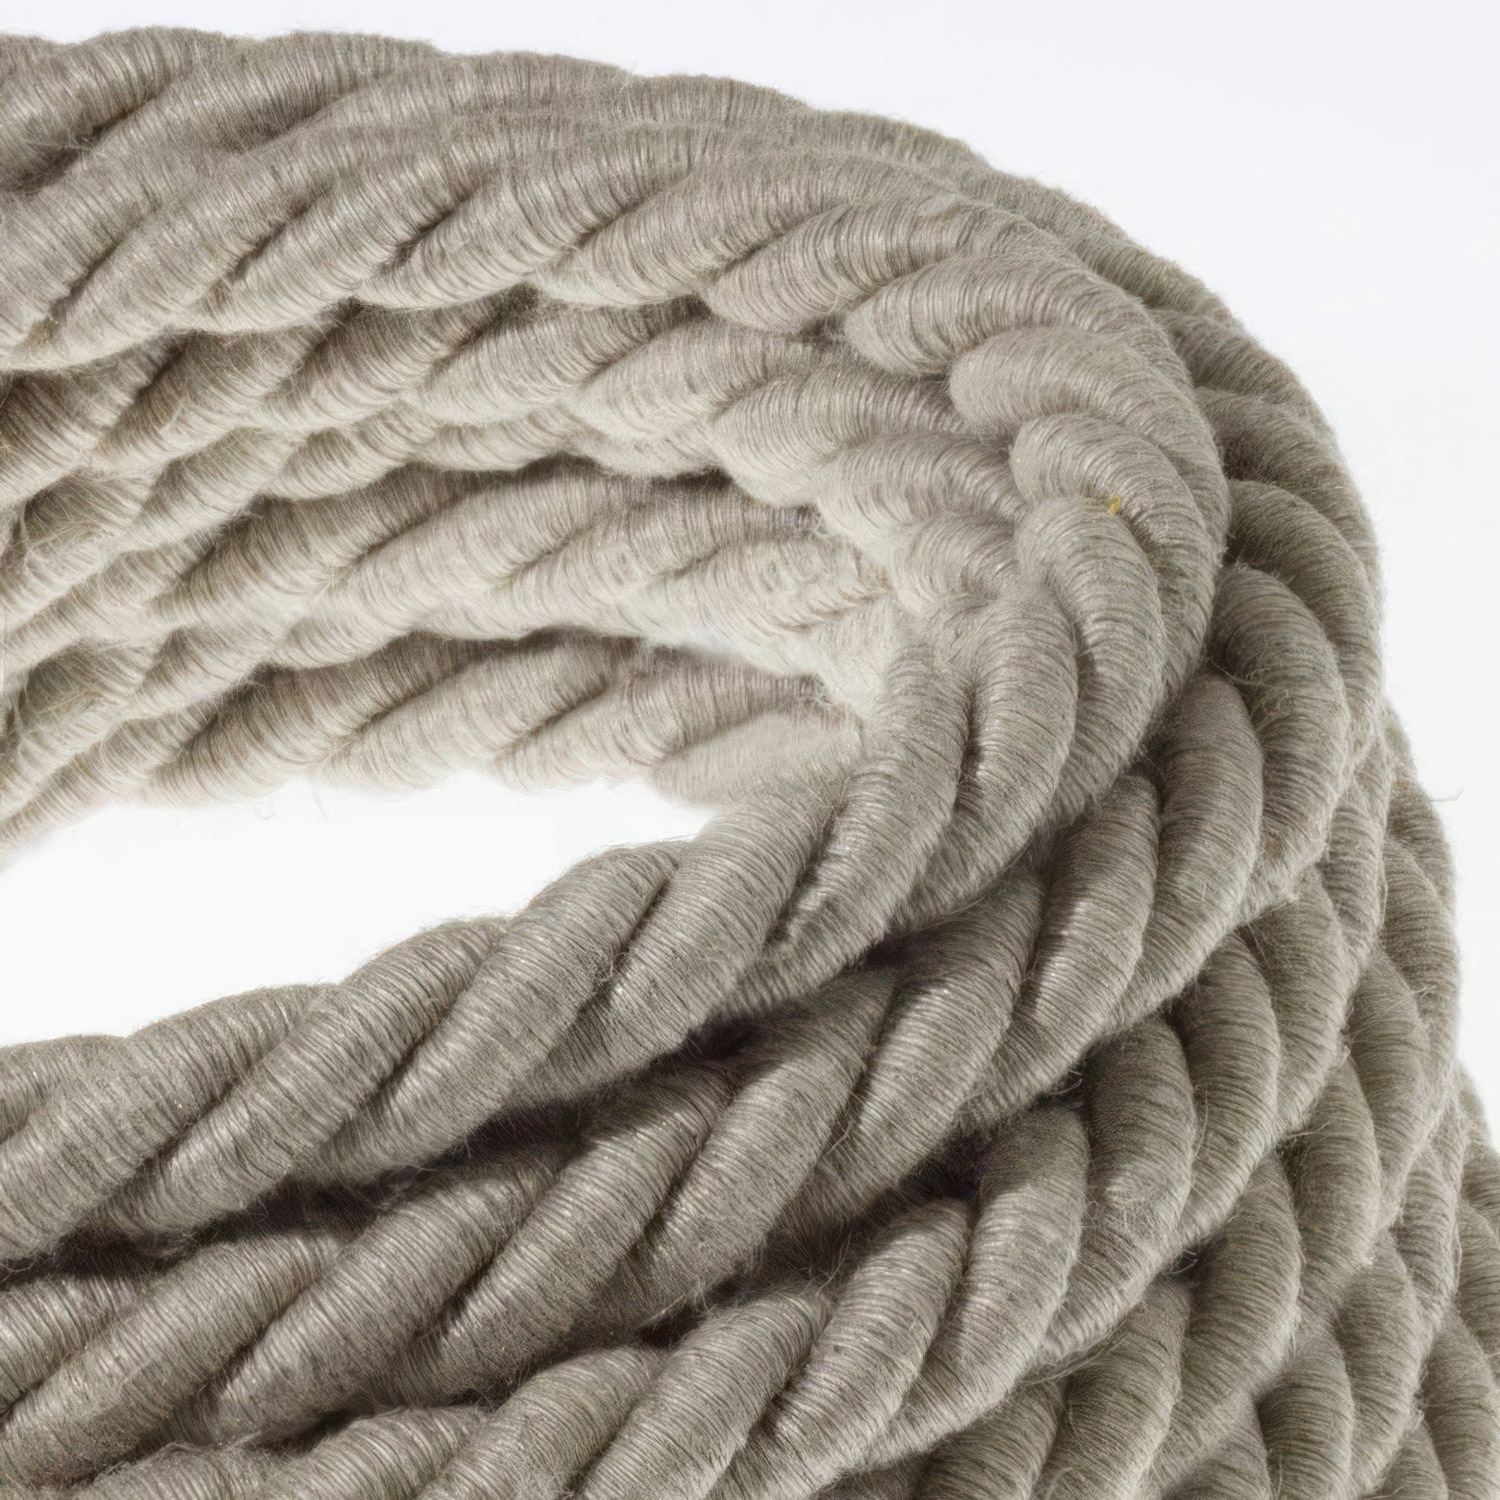 XL Rope electrical wire 18/3 AWG wire inside. Natural Linen Fabric. 16mm.